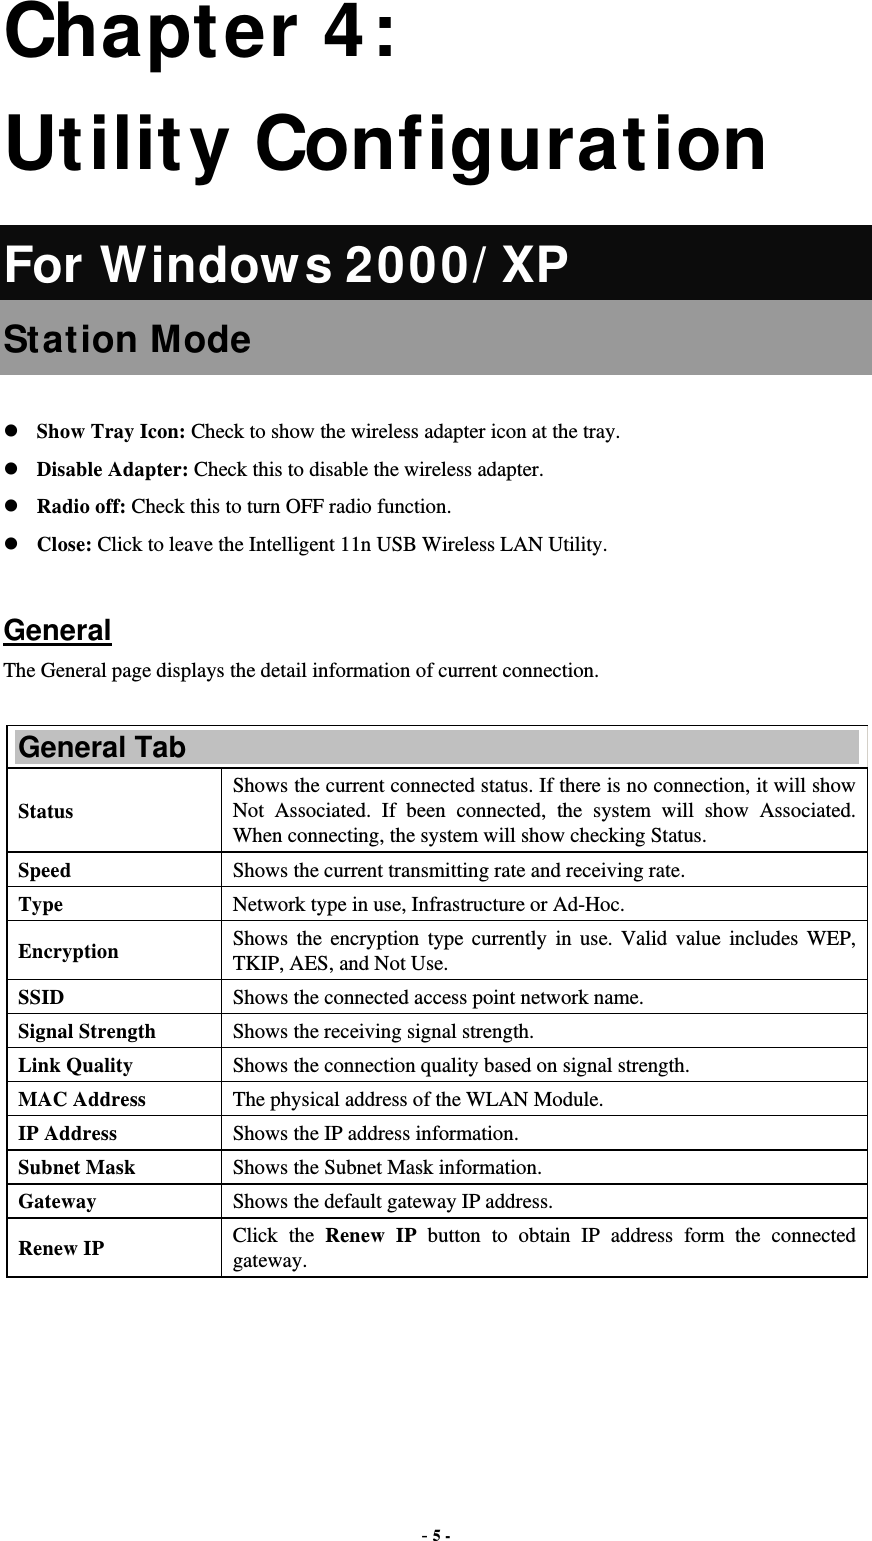  - 5 - Chapter 4: Utility Configuration For Windows 2000/XP Station Mode  Show Tray Icon: Check to show the wireless adapter icon at the tray. Disable Adapter: Check this to disable the wireless adapter. Radio off: Check this to turn OFF radio function. Close: Click to leave the Intelligent 11n USB Wireless LAN Utility.  General The General page displays the detail information of current connection.  General Tab Status  Shows the current connected status. If there is no connection, it will show Not Associated. If been connected, the system will show Associated. When connecting, the system will show checking Status. Speed  Shows the current transmitting rate and receiving rate. Type  Network type in use, Infrastructure or Ad-Hoc. Encryption  Shows the encryption type currently in use. Valid value includes WEP, TKIP, AES, and Not Use. SSID  Shows the connected access point network name. Signal Strength  Shows the receiving signal strength. Link Quality  Shows the connection quality based on signal strength. MAC Address  The physical address of the WLAN Module. IP Address  Shows the IP address information. Subnet Mask  Shows the Subnet Mask information. Gateway  Shows the default gateway IP address. Renew IP  Click the Renew IP button to obtain IP address form the connected gateway. 